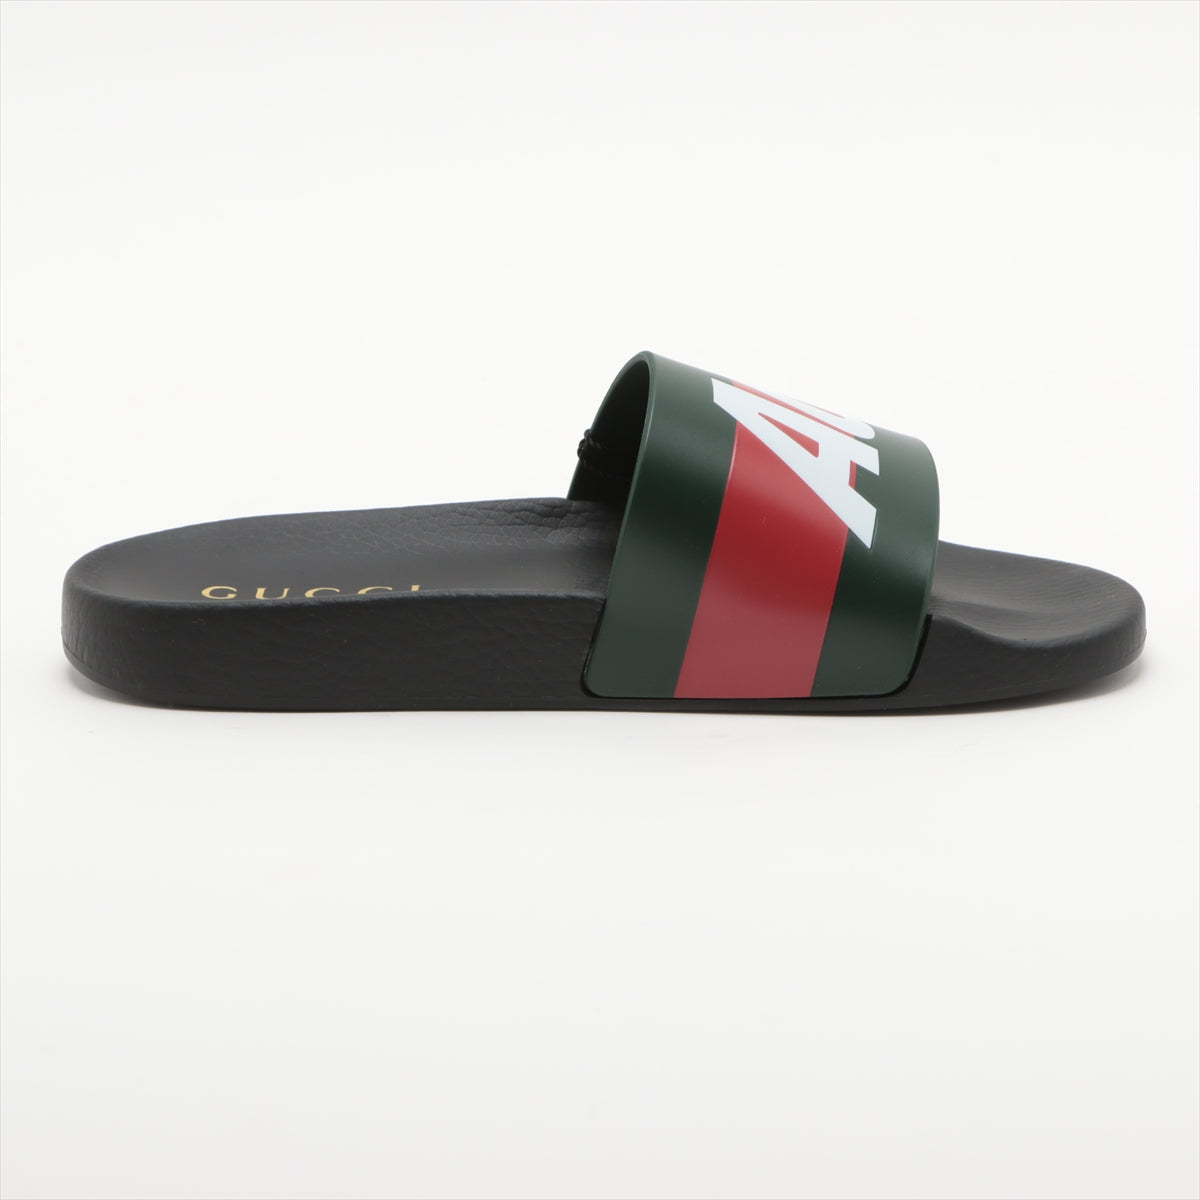 Palace x Gucci Rubber Sandals 8 Men's Multicolor 723353 box There is a storage bag